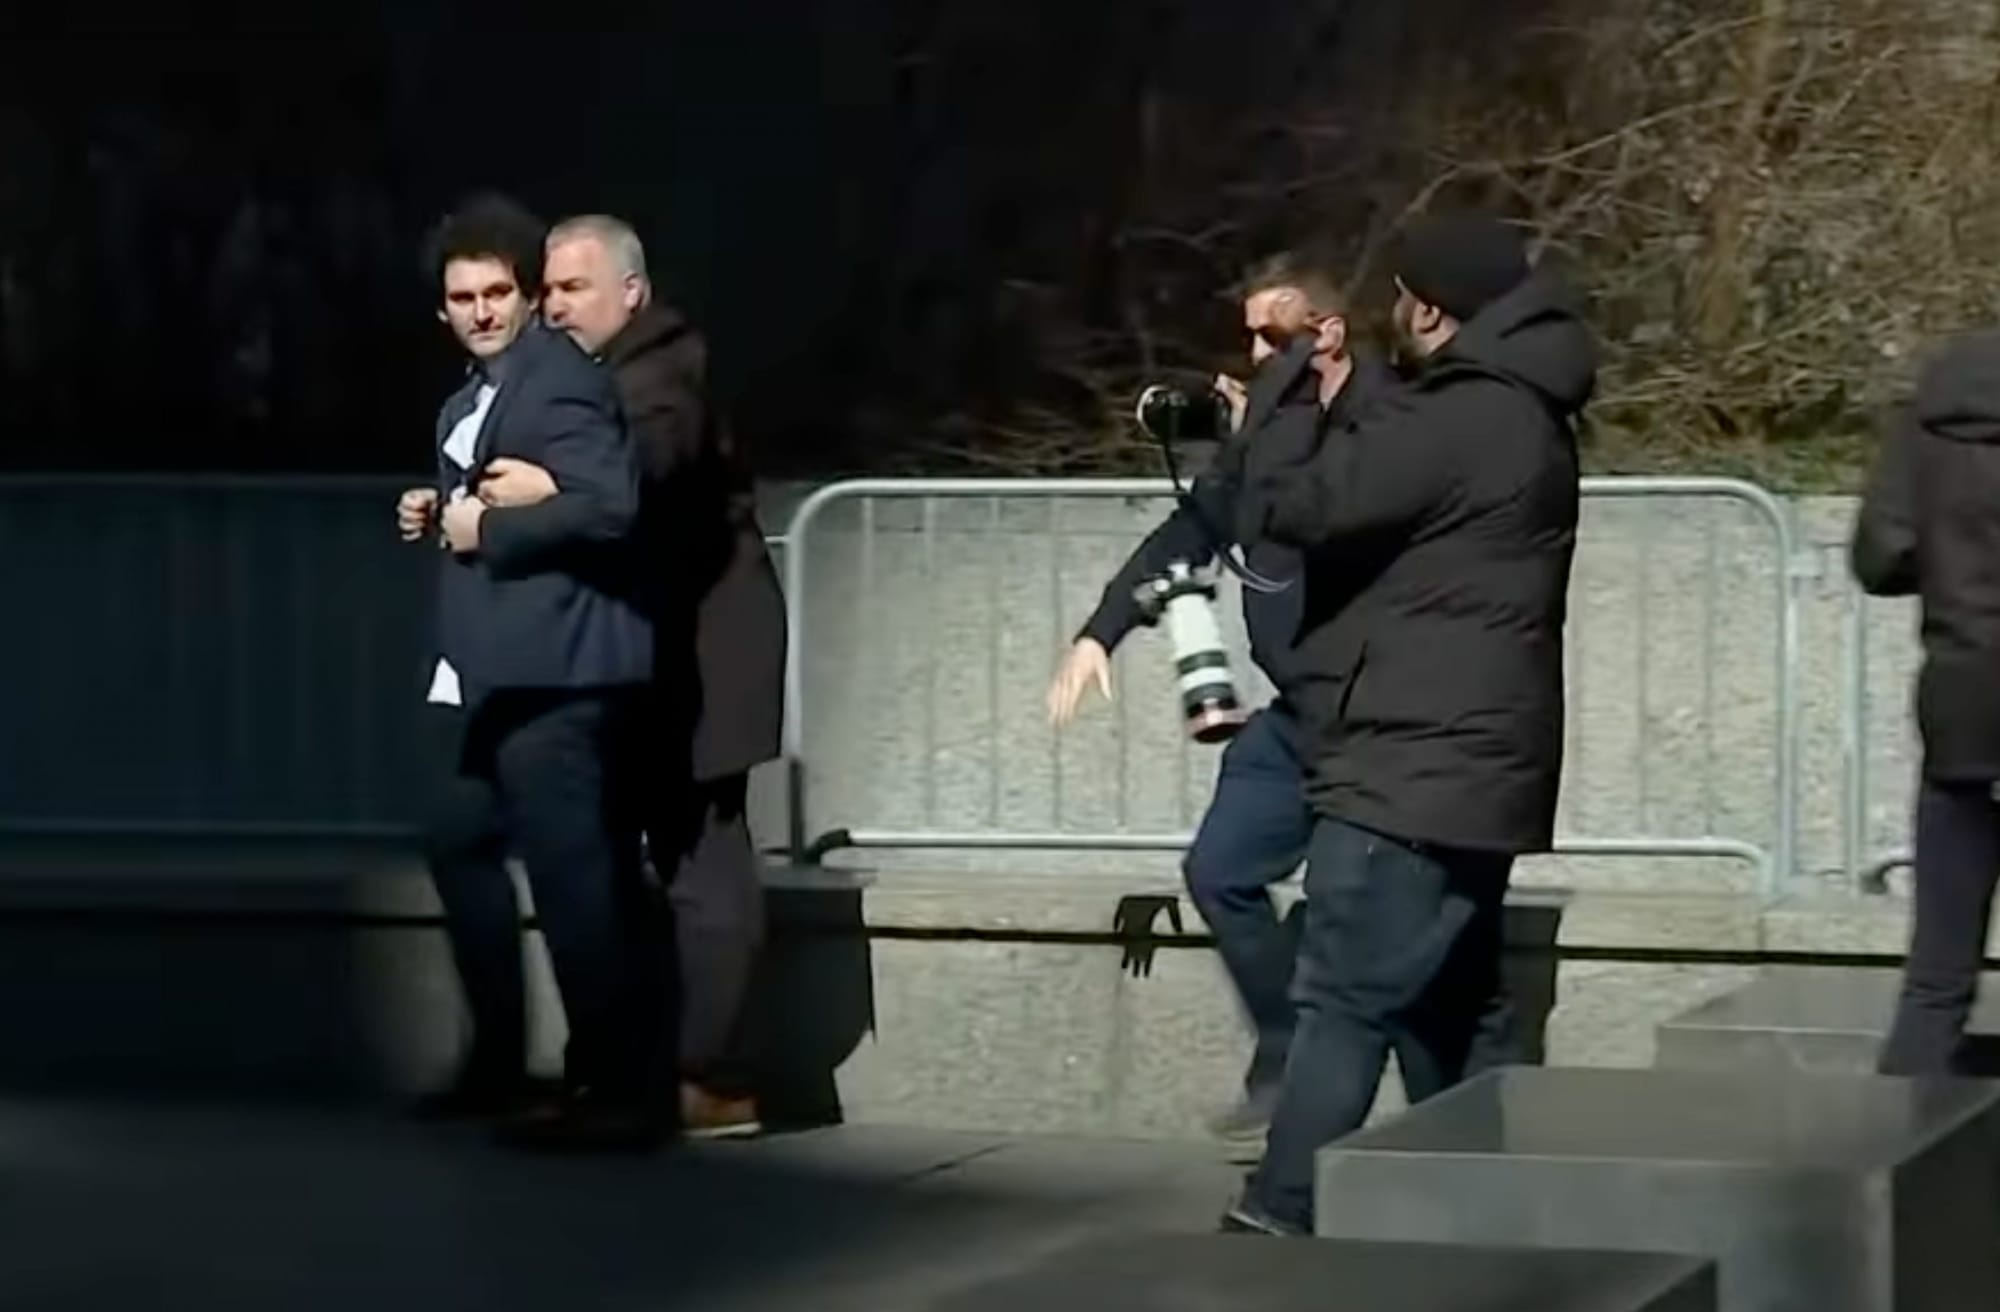 A bodyguard walks next to Sam Bankman-Fried with his arms underneath SBF's arms. They have just exited a crowd of photographers. SBF is wearing a navy suit and is looking back at the photographers while walking forwards.